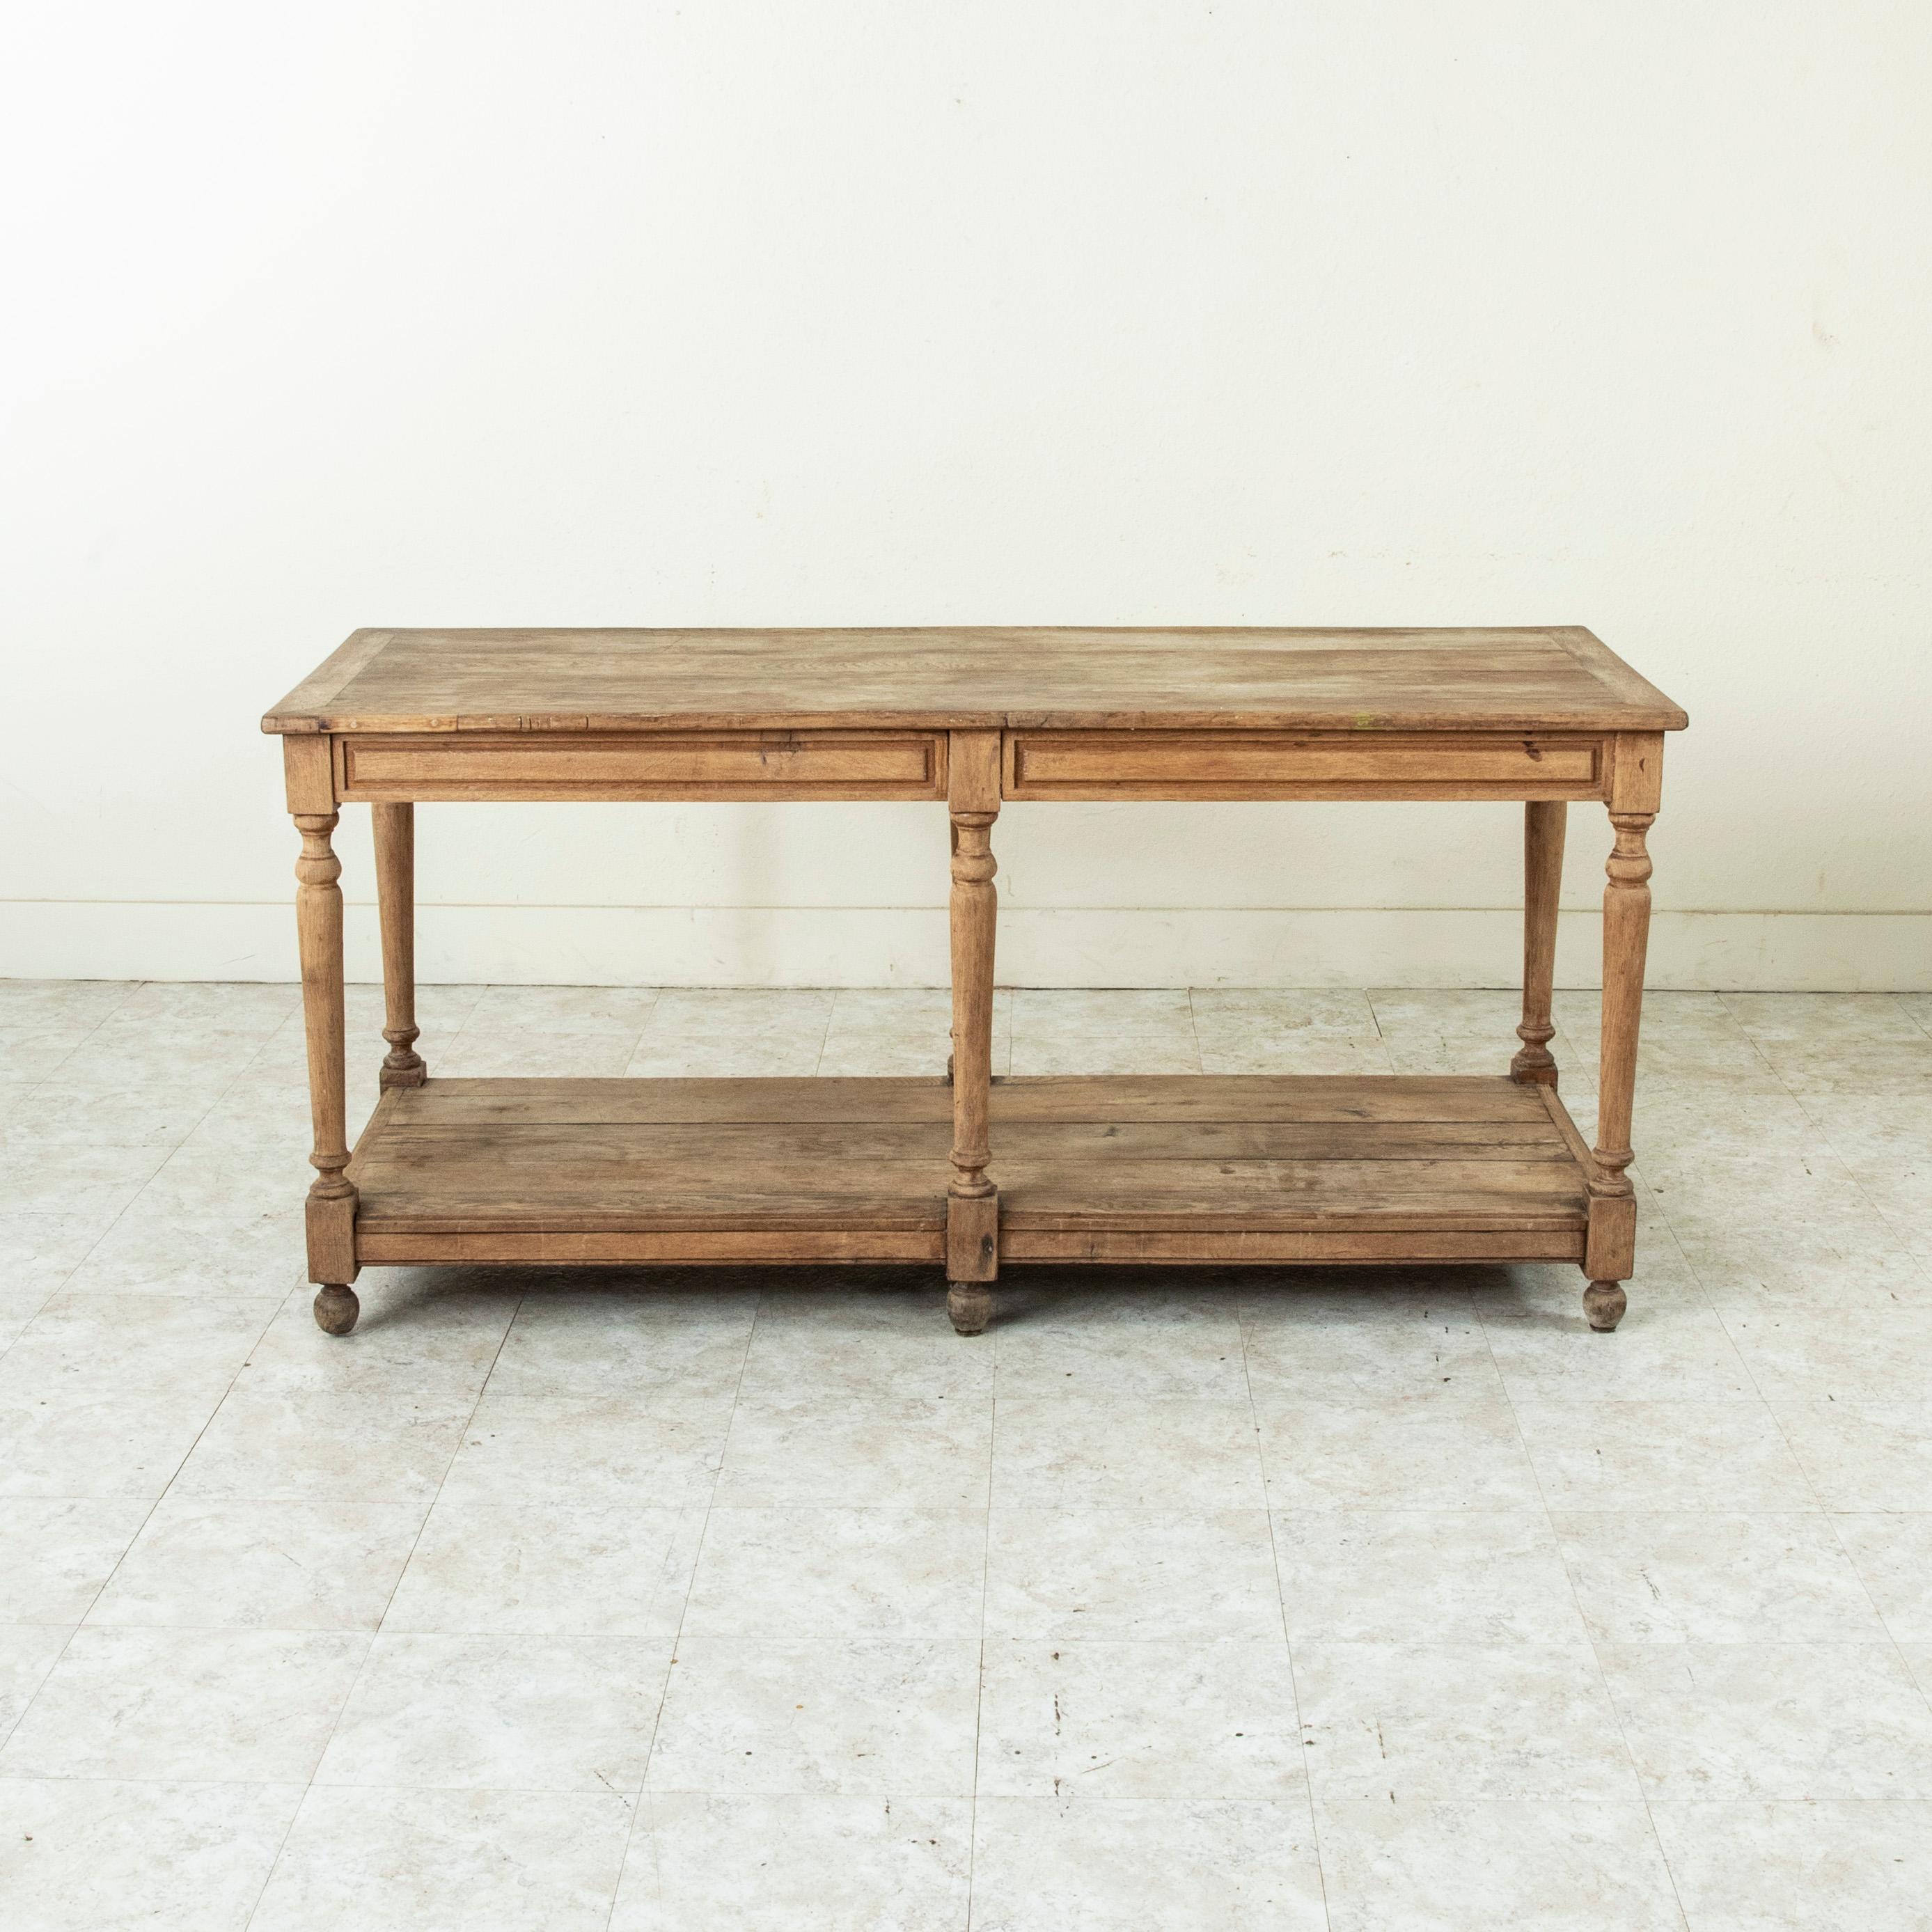 Originally used in a French fabric store to lay out and cut fabric, this mid-twentieth century bleached oak silk trader's table rests on tapered turned legs which support its lower shelf. This draper's table, with its lower shelf for storage or